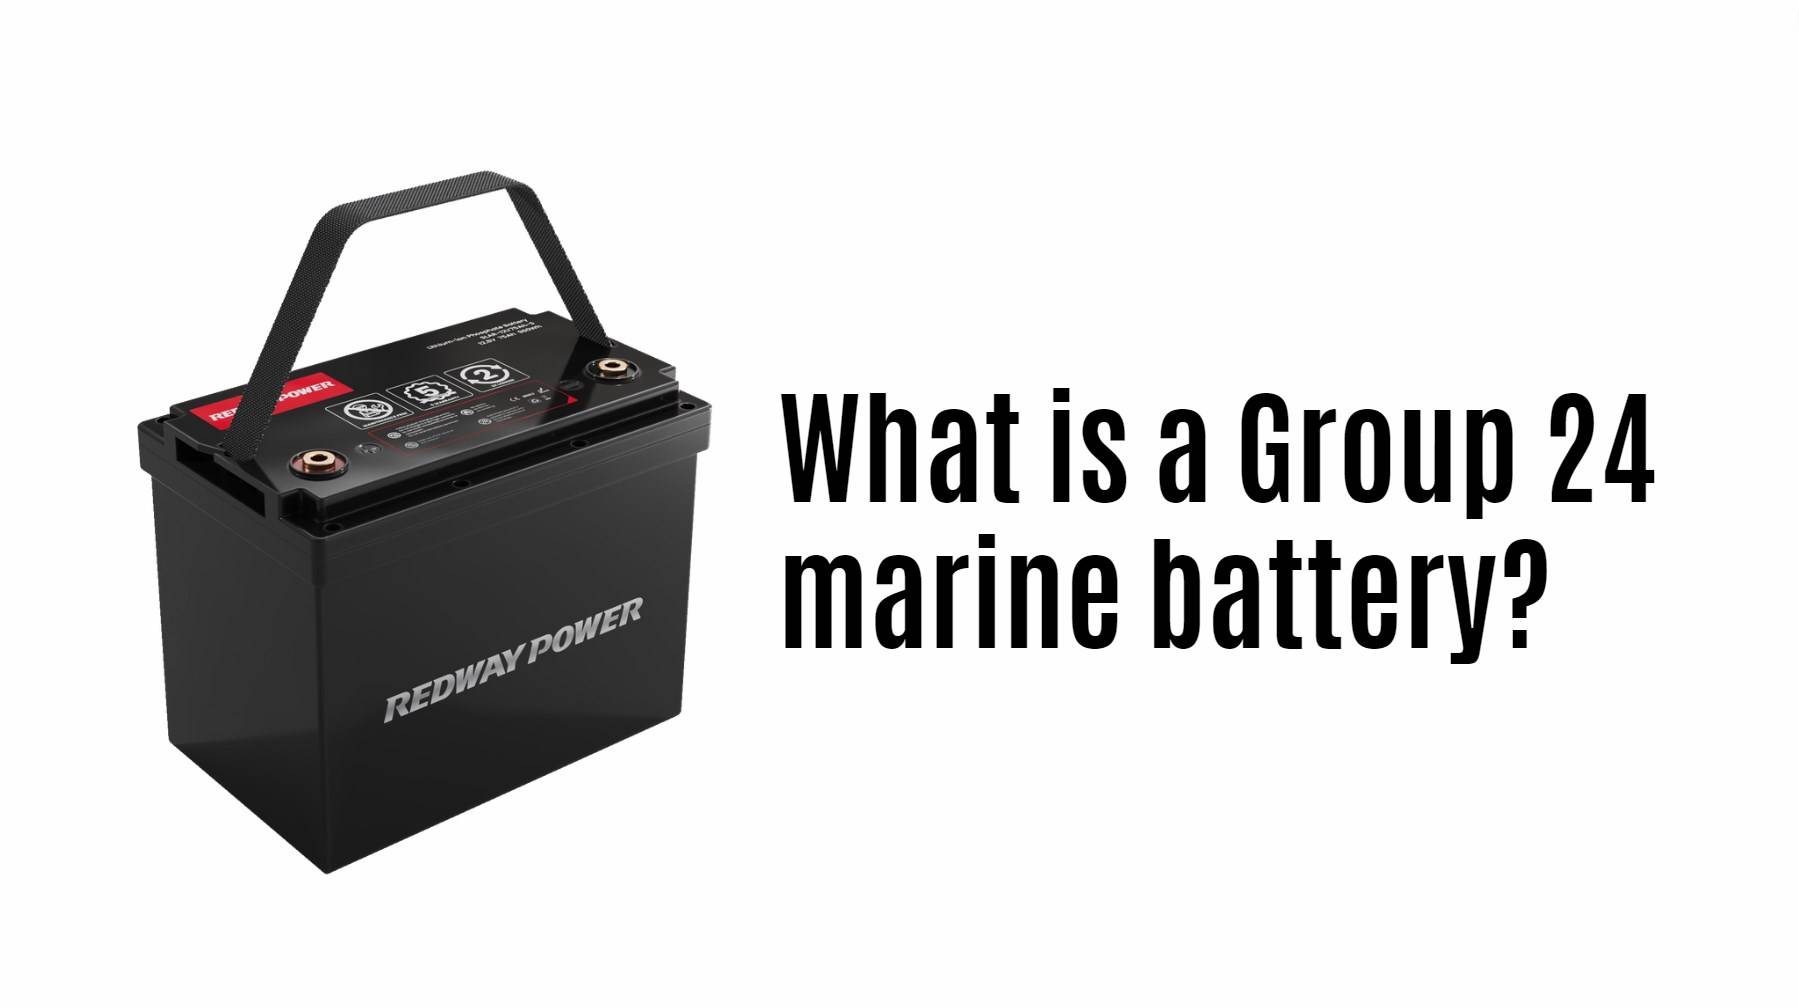 What is a Group 24 marine battery?